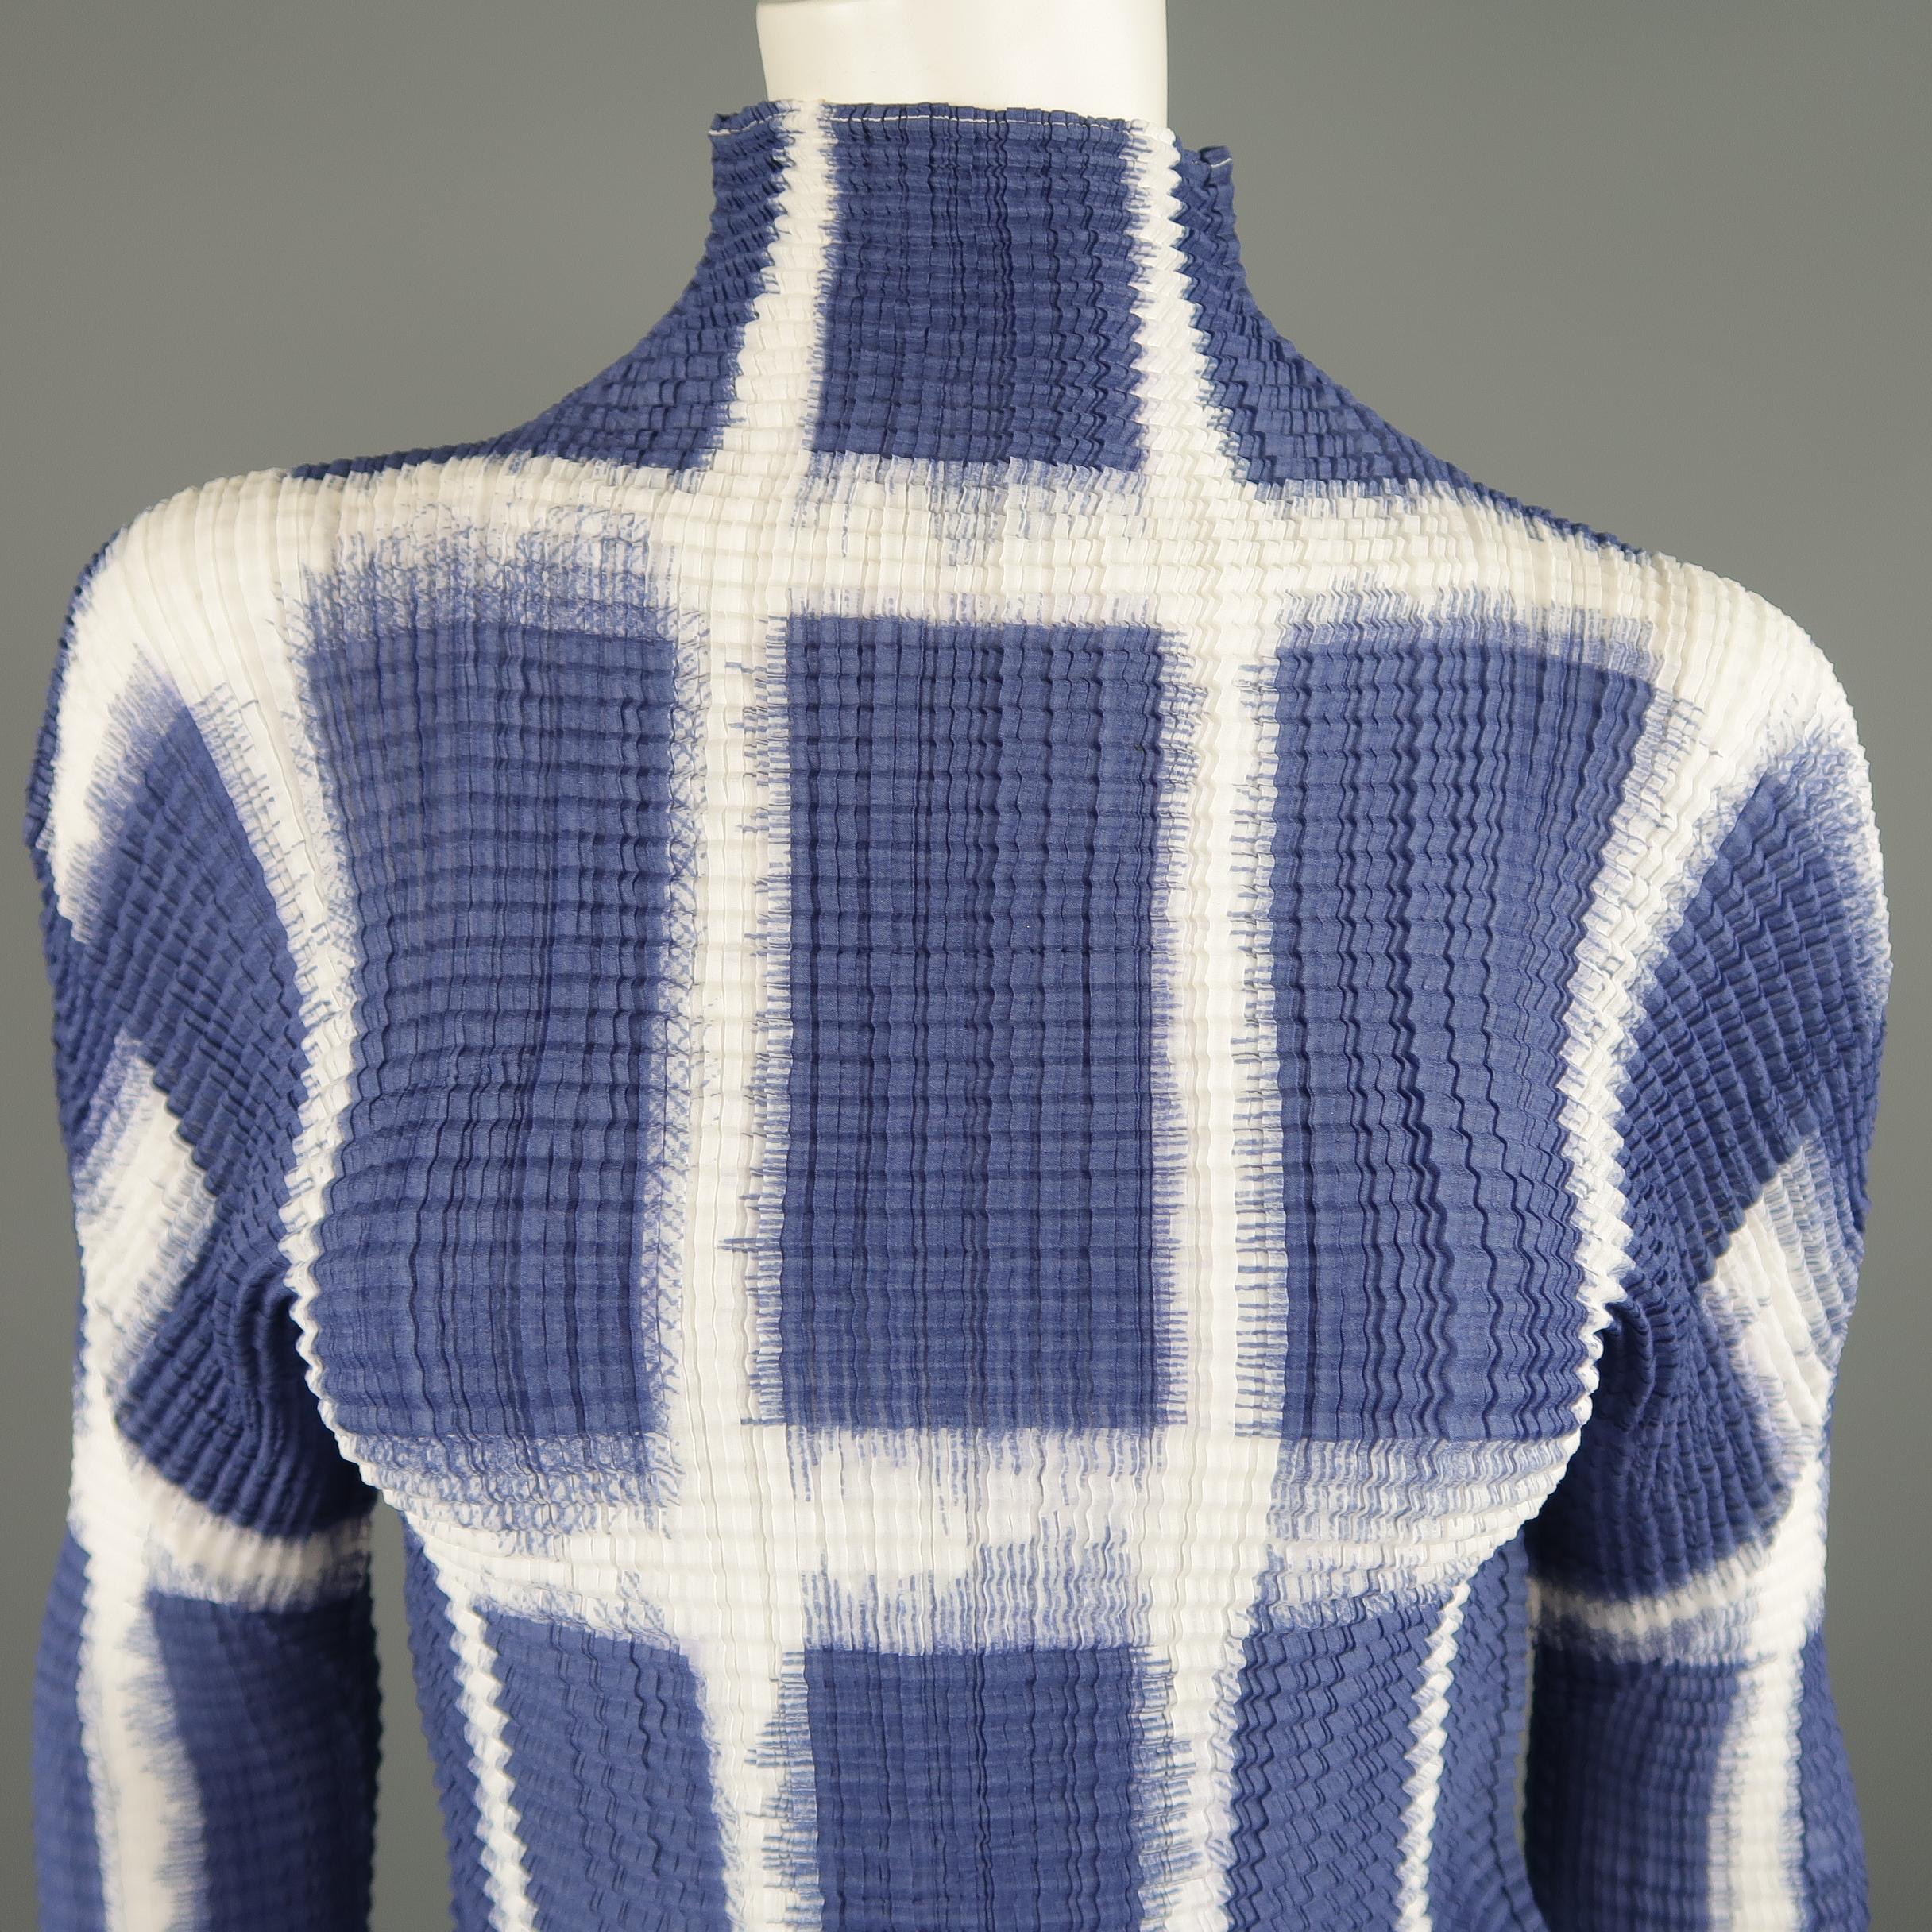 Issey Miyake pullover comes in cross pleated textured silk with an all over abstract windowpane print and mock neck. Made in Japan.
 
Excellent Pre-Owned Condition.
Marked: M
 
Measurements:
 
Shoulder: 20 in.
Bust: 30 in.
Sleeve: 21 in.
Length: 26